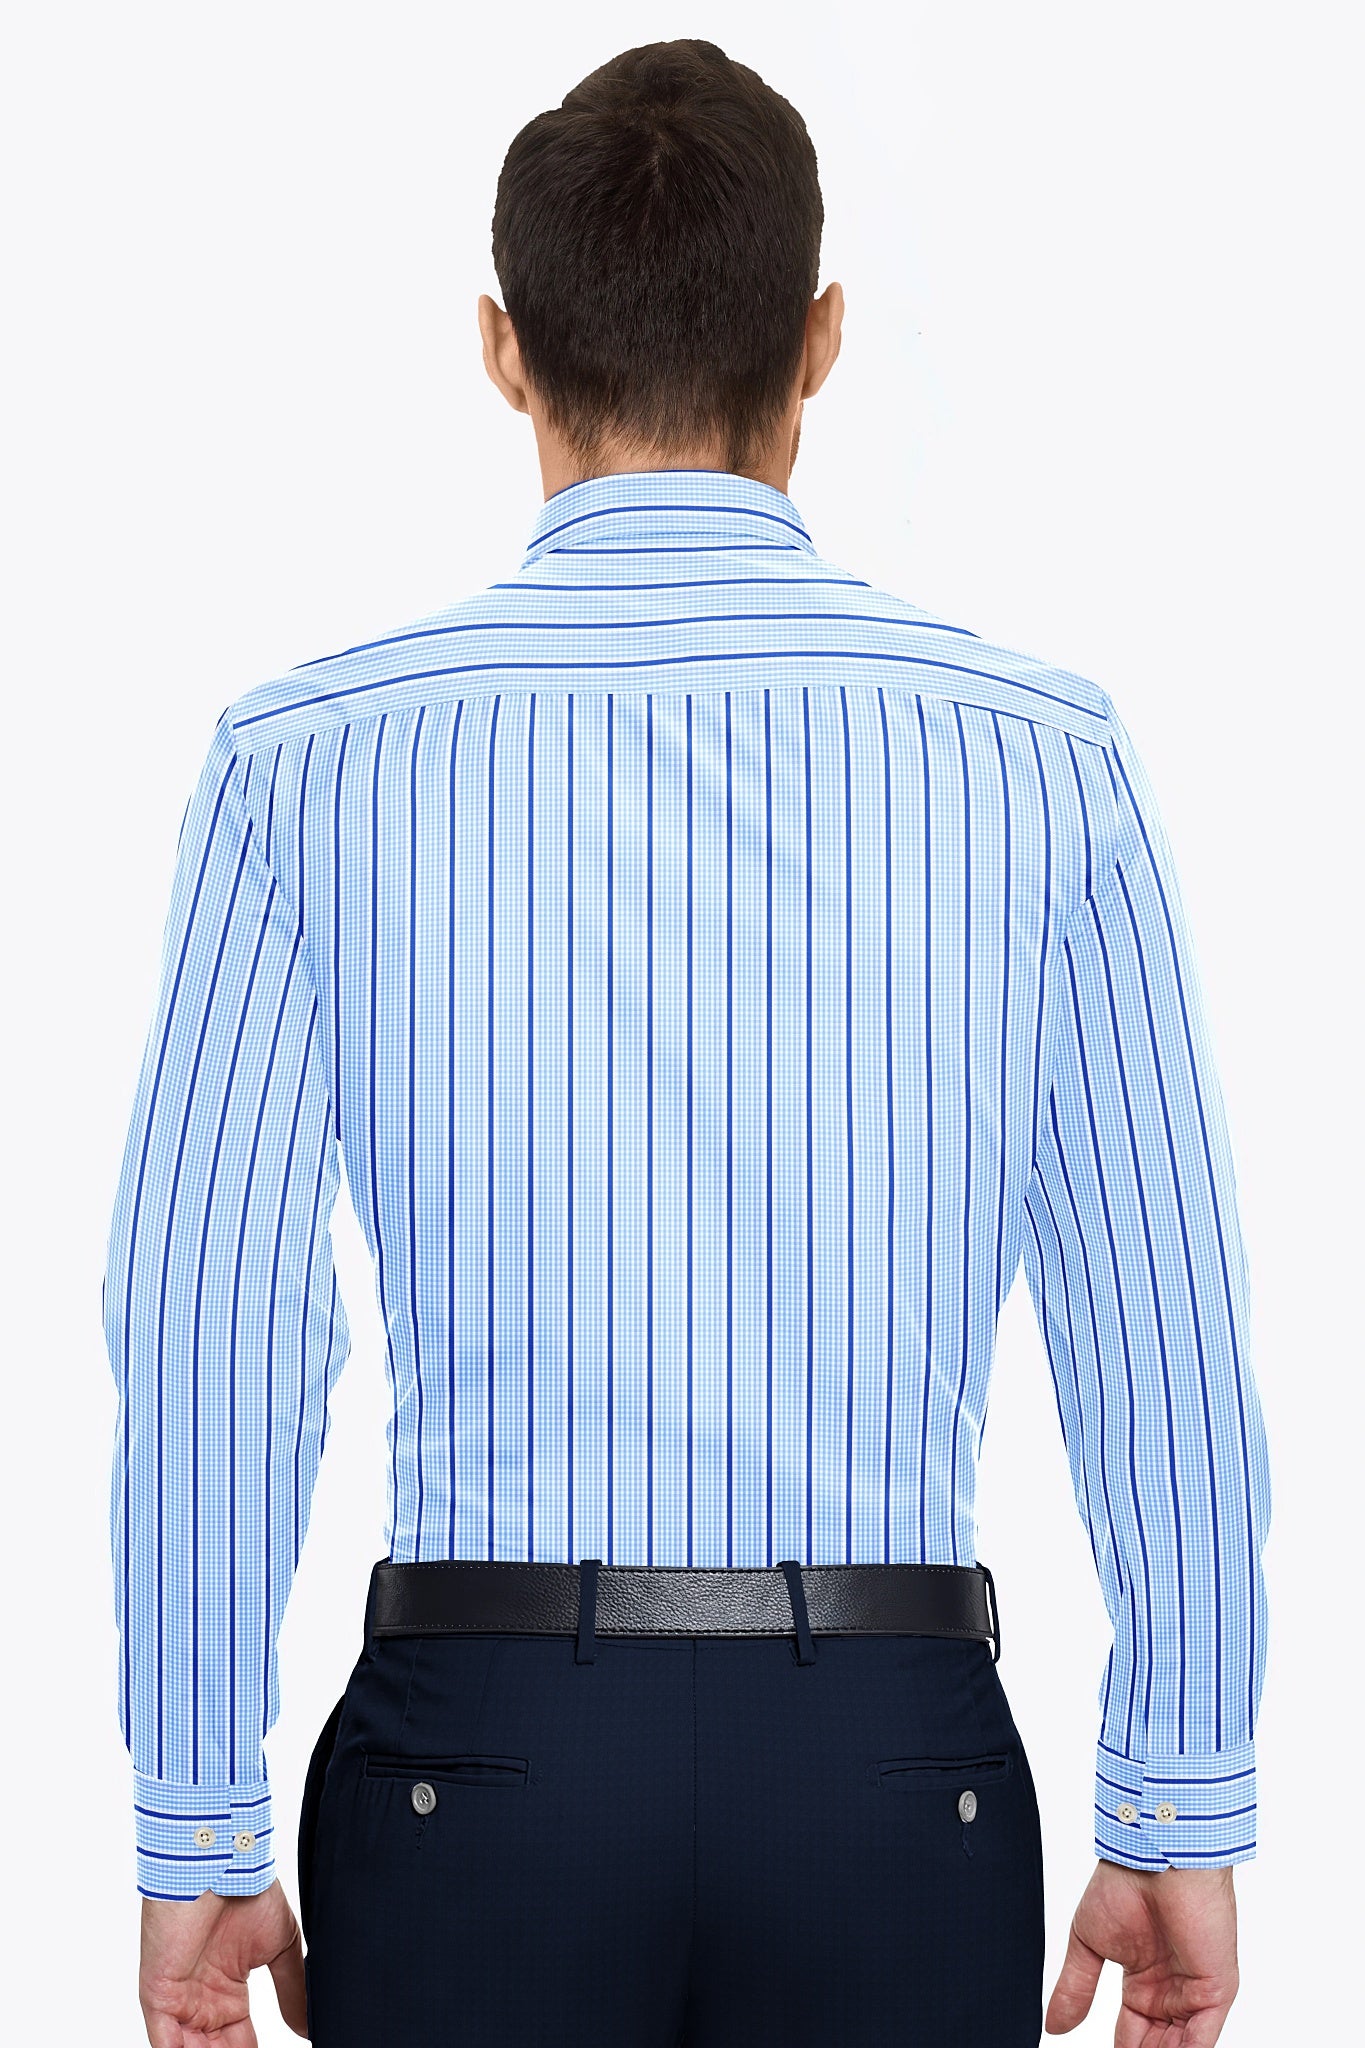 White with Cerulean Blue and Cobalt Blue Wide Chalk Stripes and Checks Cotton Shirt